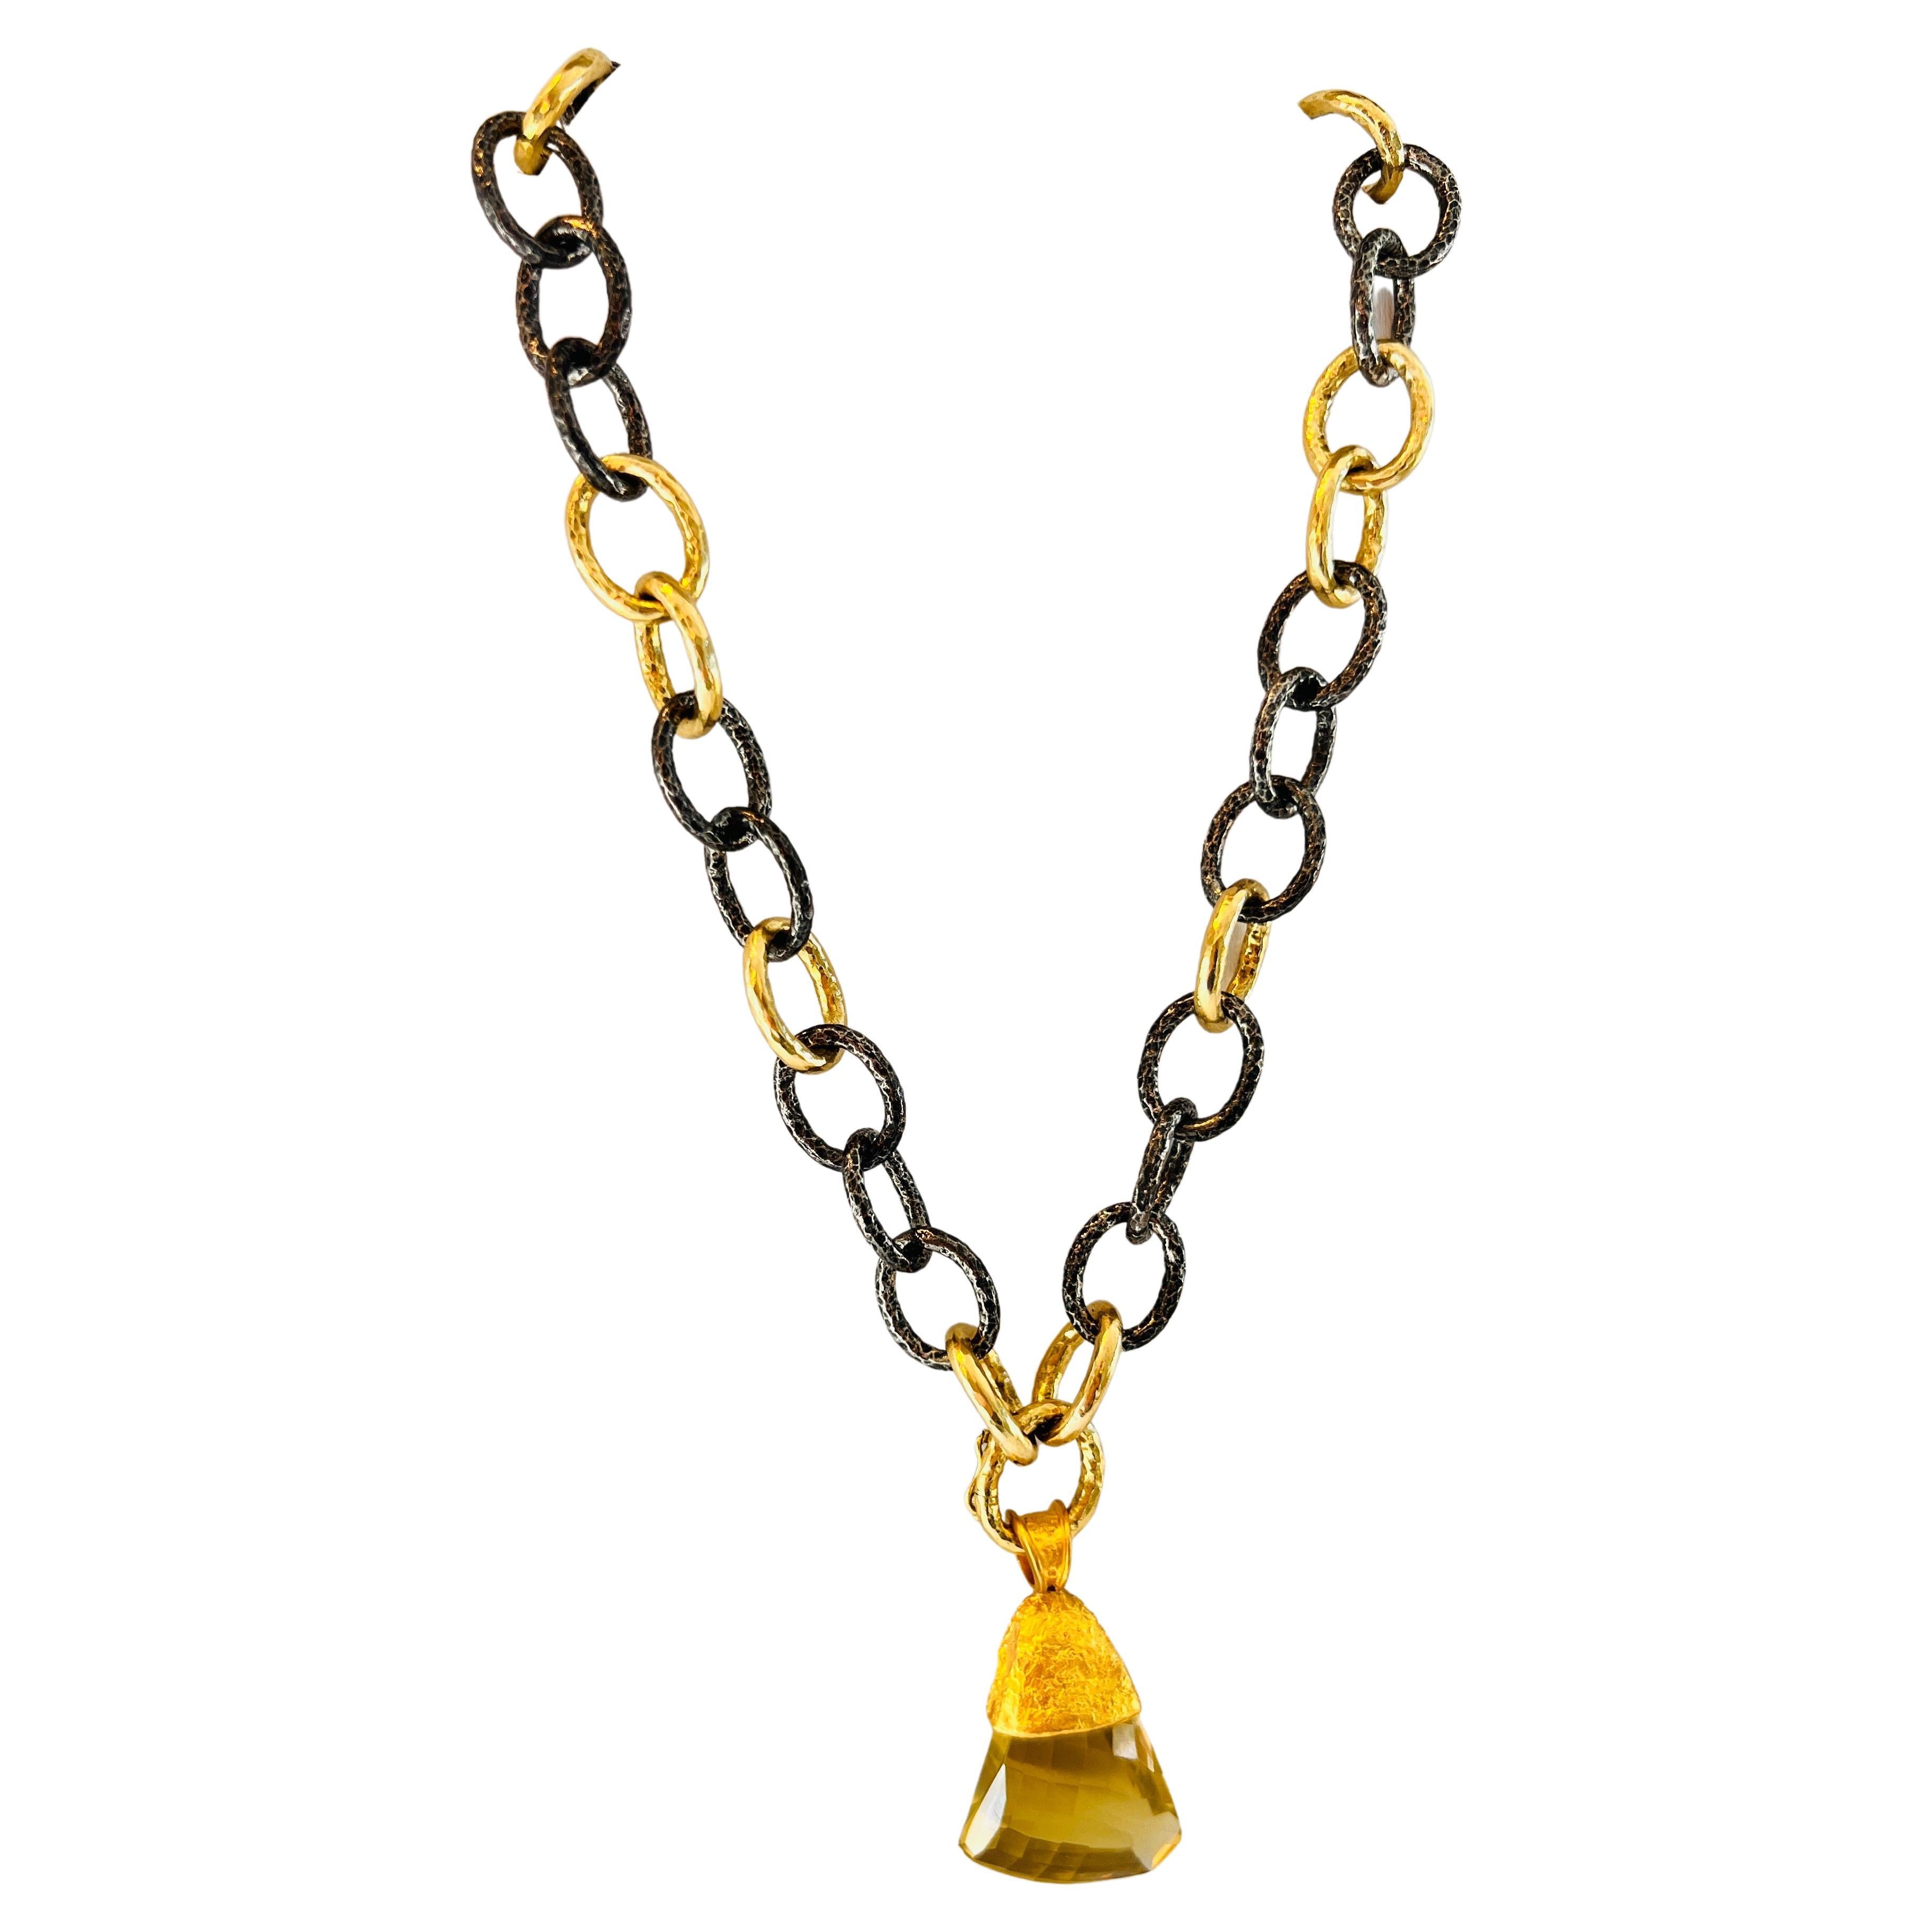 The 50/50 Blackened Silver and Gold 16" Chain Necklace, by Tagili